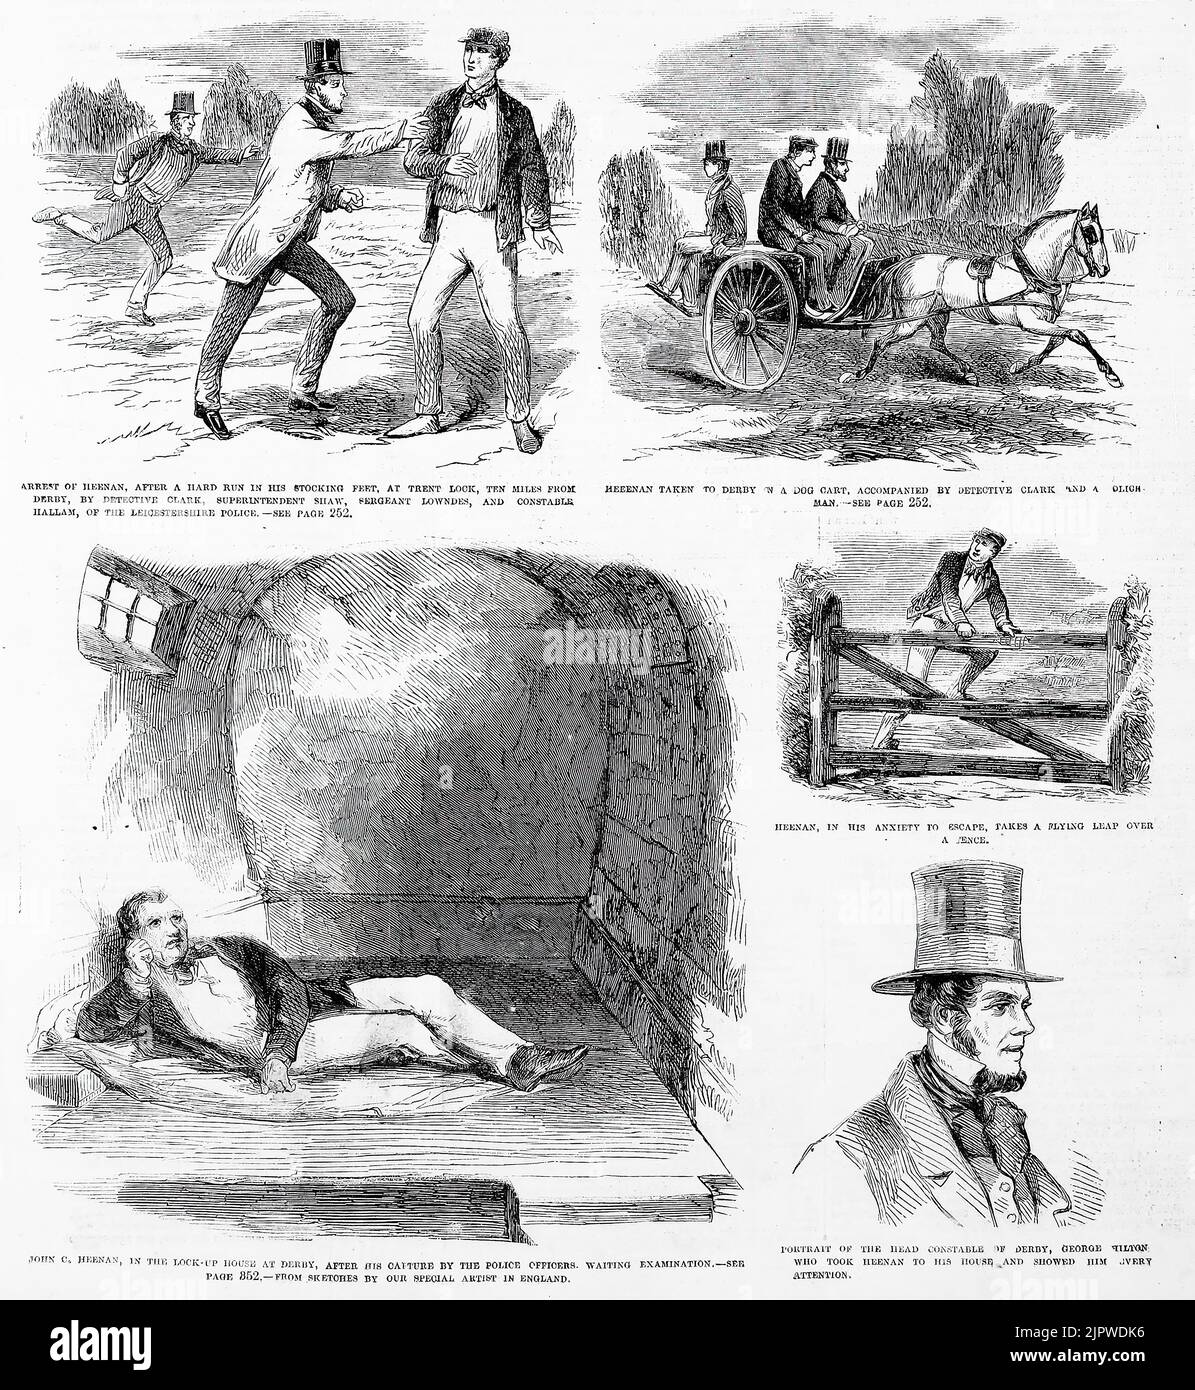 Arrest of John C. Heenan, after a hard run in his stocking feet, at Trent Lock, by the Lancashire police - Heenan taken to Derby in a dog cart - Heenan takes a flying leap over a fence - Heenan in the lock-up house at Derby, after his capture, waiting examination - Portrait of head constable of Derby, George Hilton. April 6th, 1860. 19th century illustration from Frank Leslie's Illustrated Newspaper Stock Photo